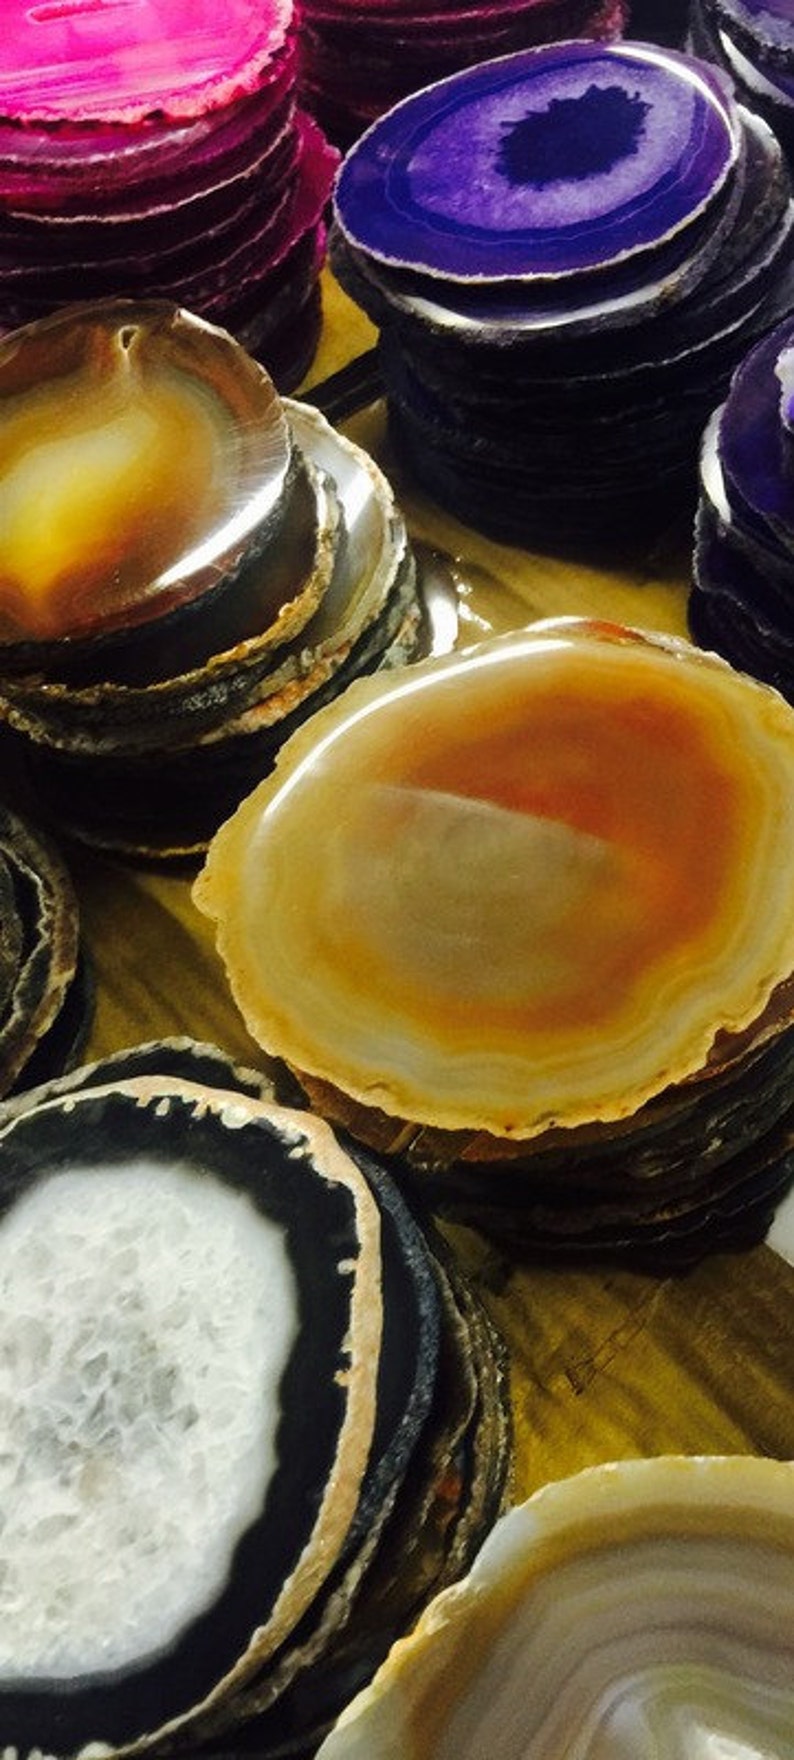 Agate Slices Coasters Size Agate Coaster High Quality from Brazil Create Your Own Set Mosaic Art Framing Home Decor Crafts image 3